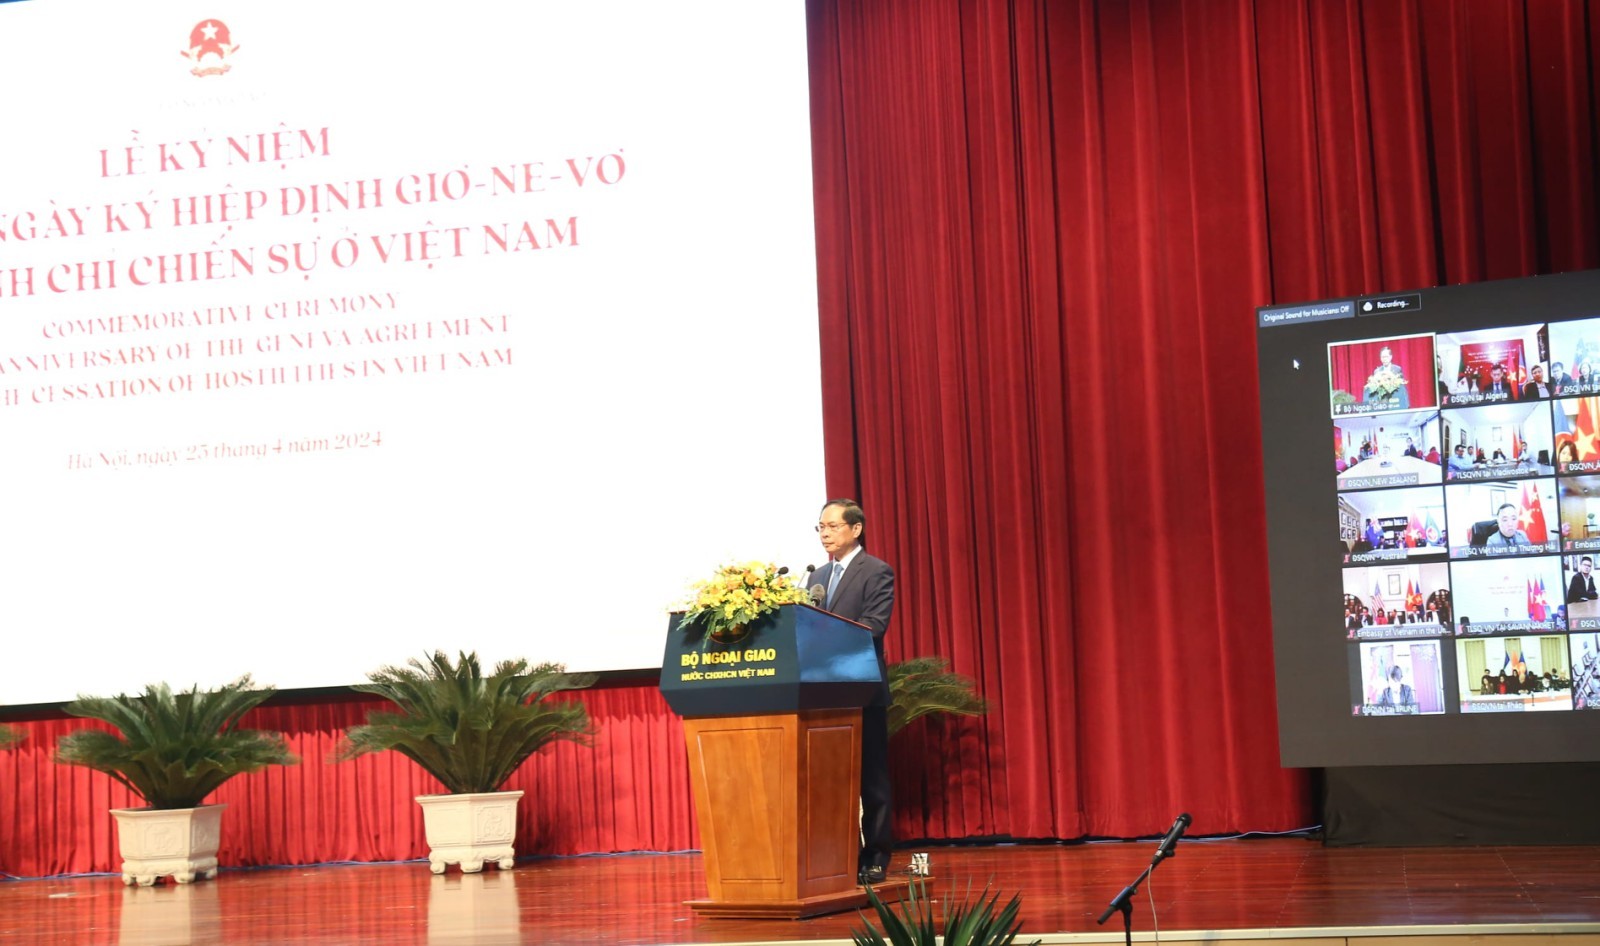 Remarks by FM at Commemorative Ceremony of 70th Anniversary of Geneva Agreement on Cessation of Hostilities in Vietnam